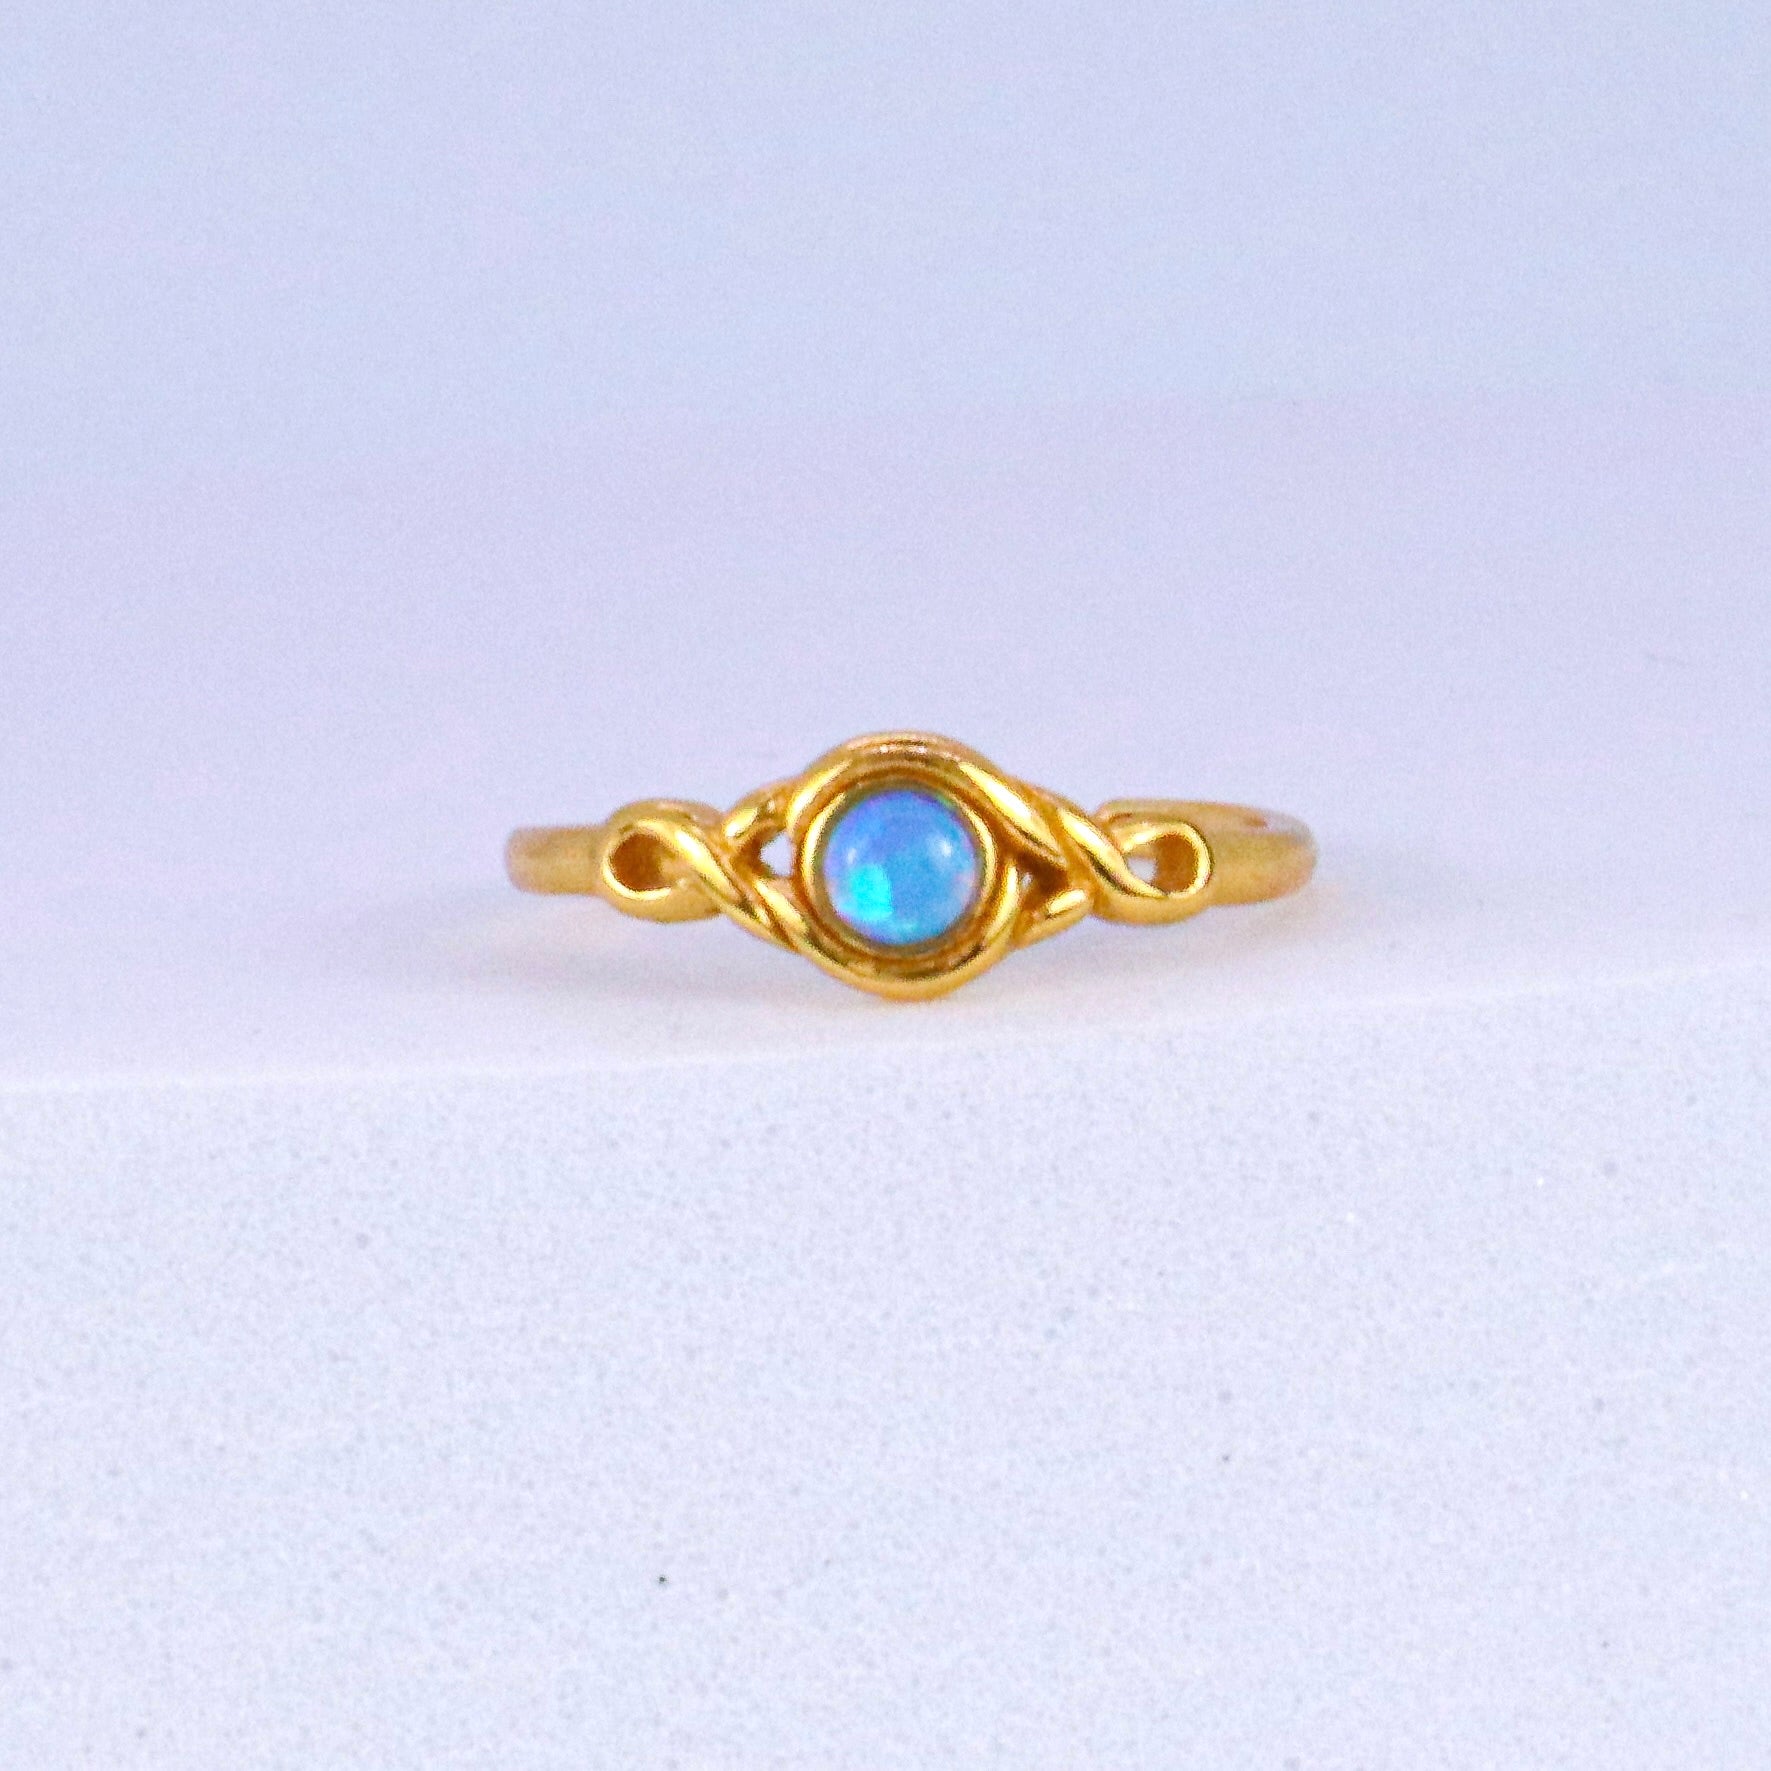 Blue Opal & 14k Gold over Sterling Silver Toe Ring